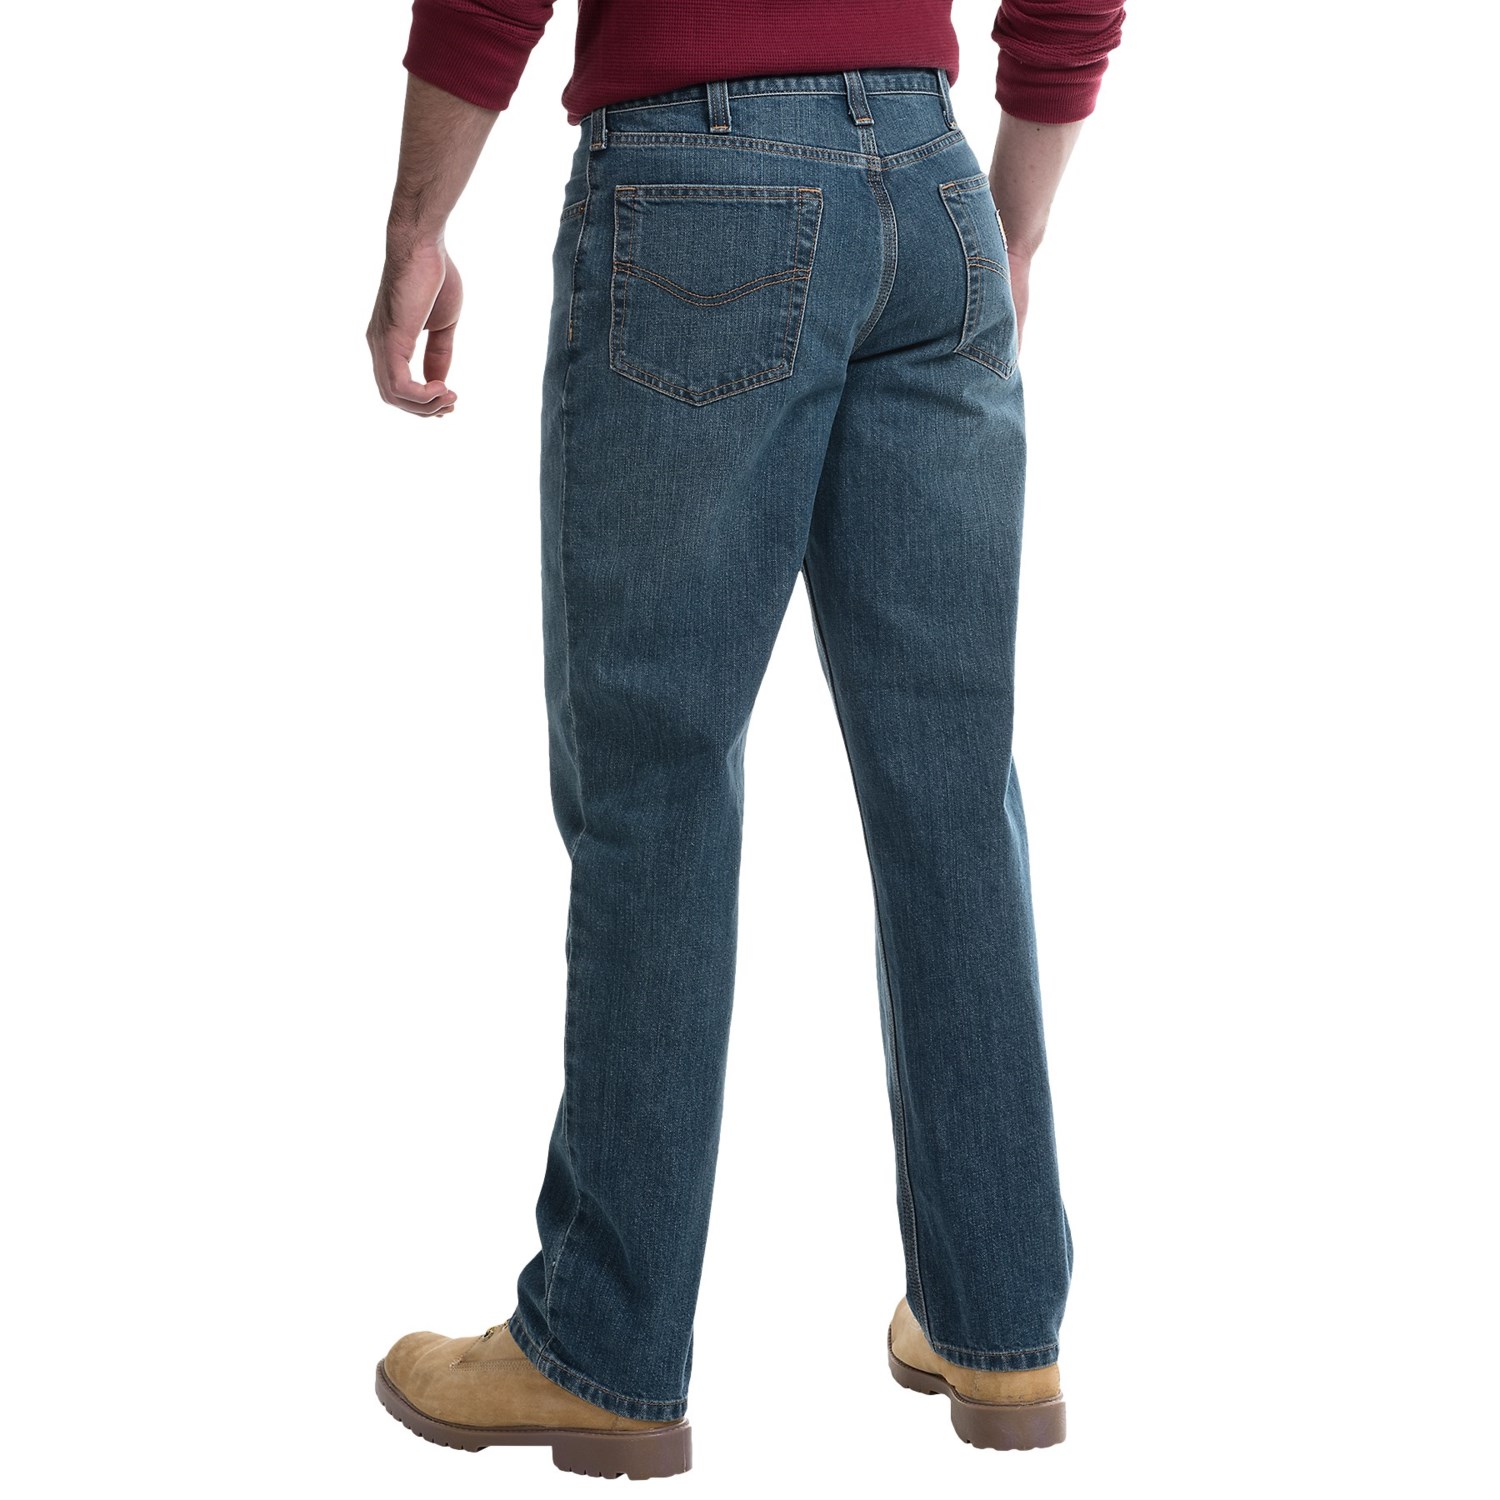 Carhartt 101483 Holter Relaxed Fit Denim Jeans (For Men)